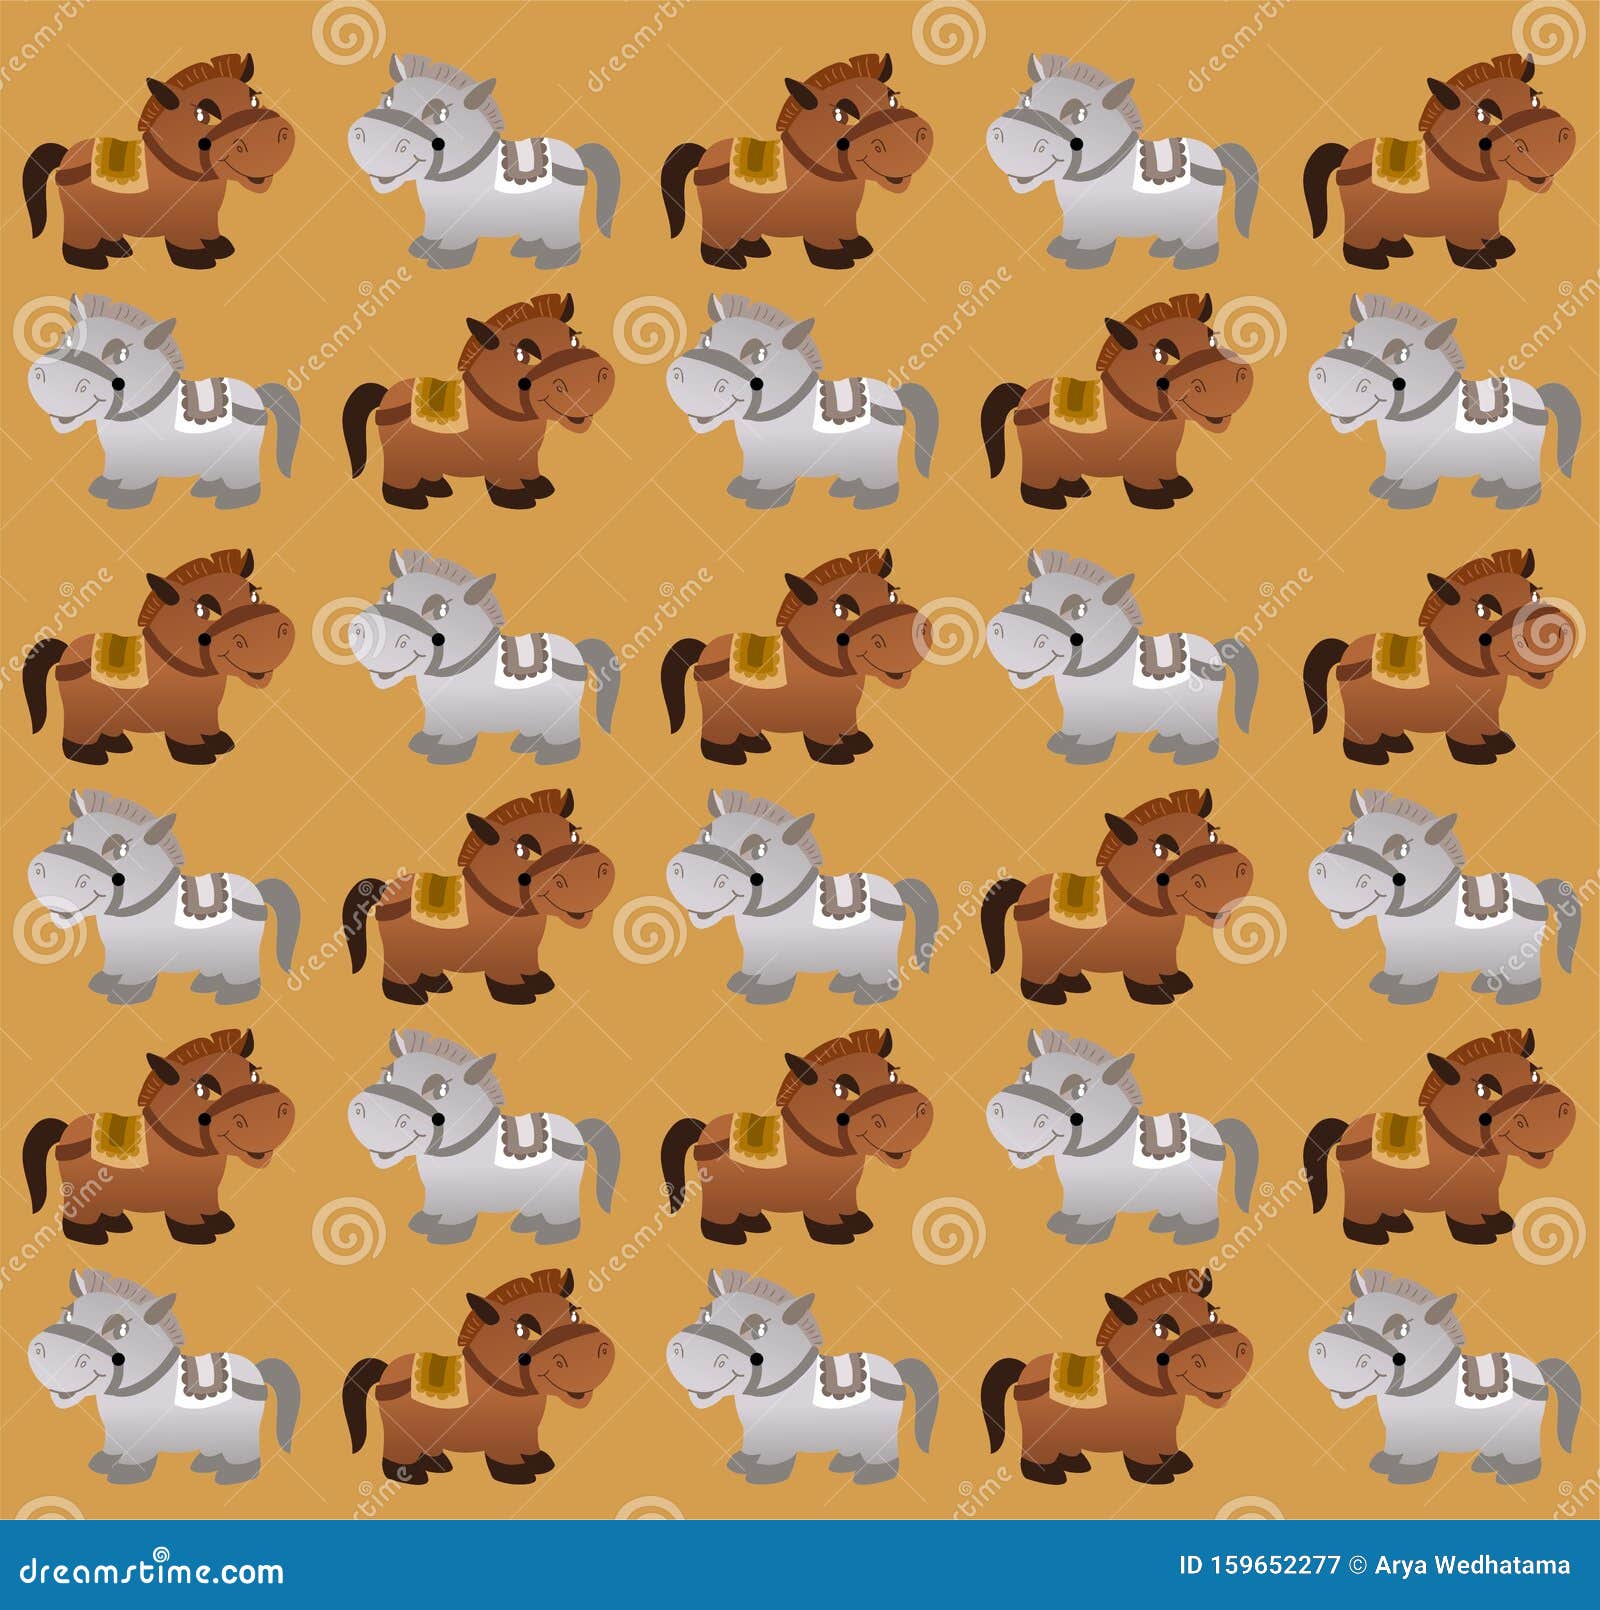 The Amazing of Cute Horse Cartoon Funny Character, Pattern Wallpaper in  Brown Background Stock Illustration - Illustration of child, collection:  159652277